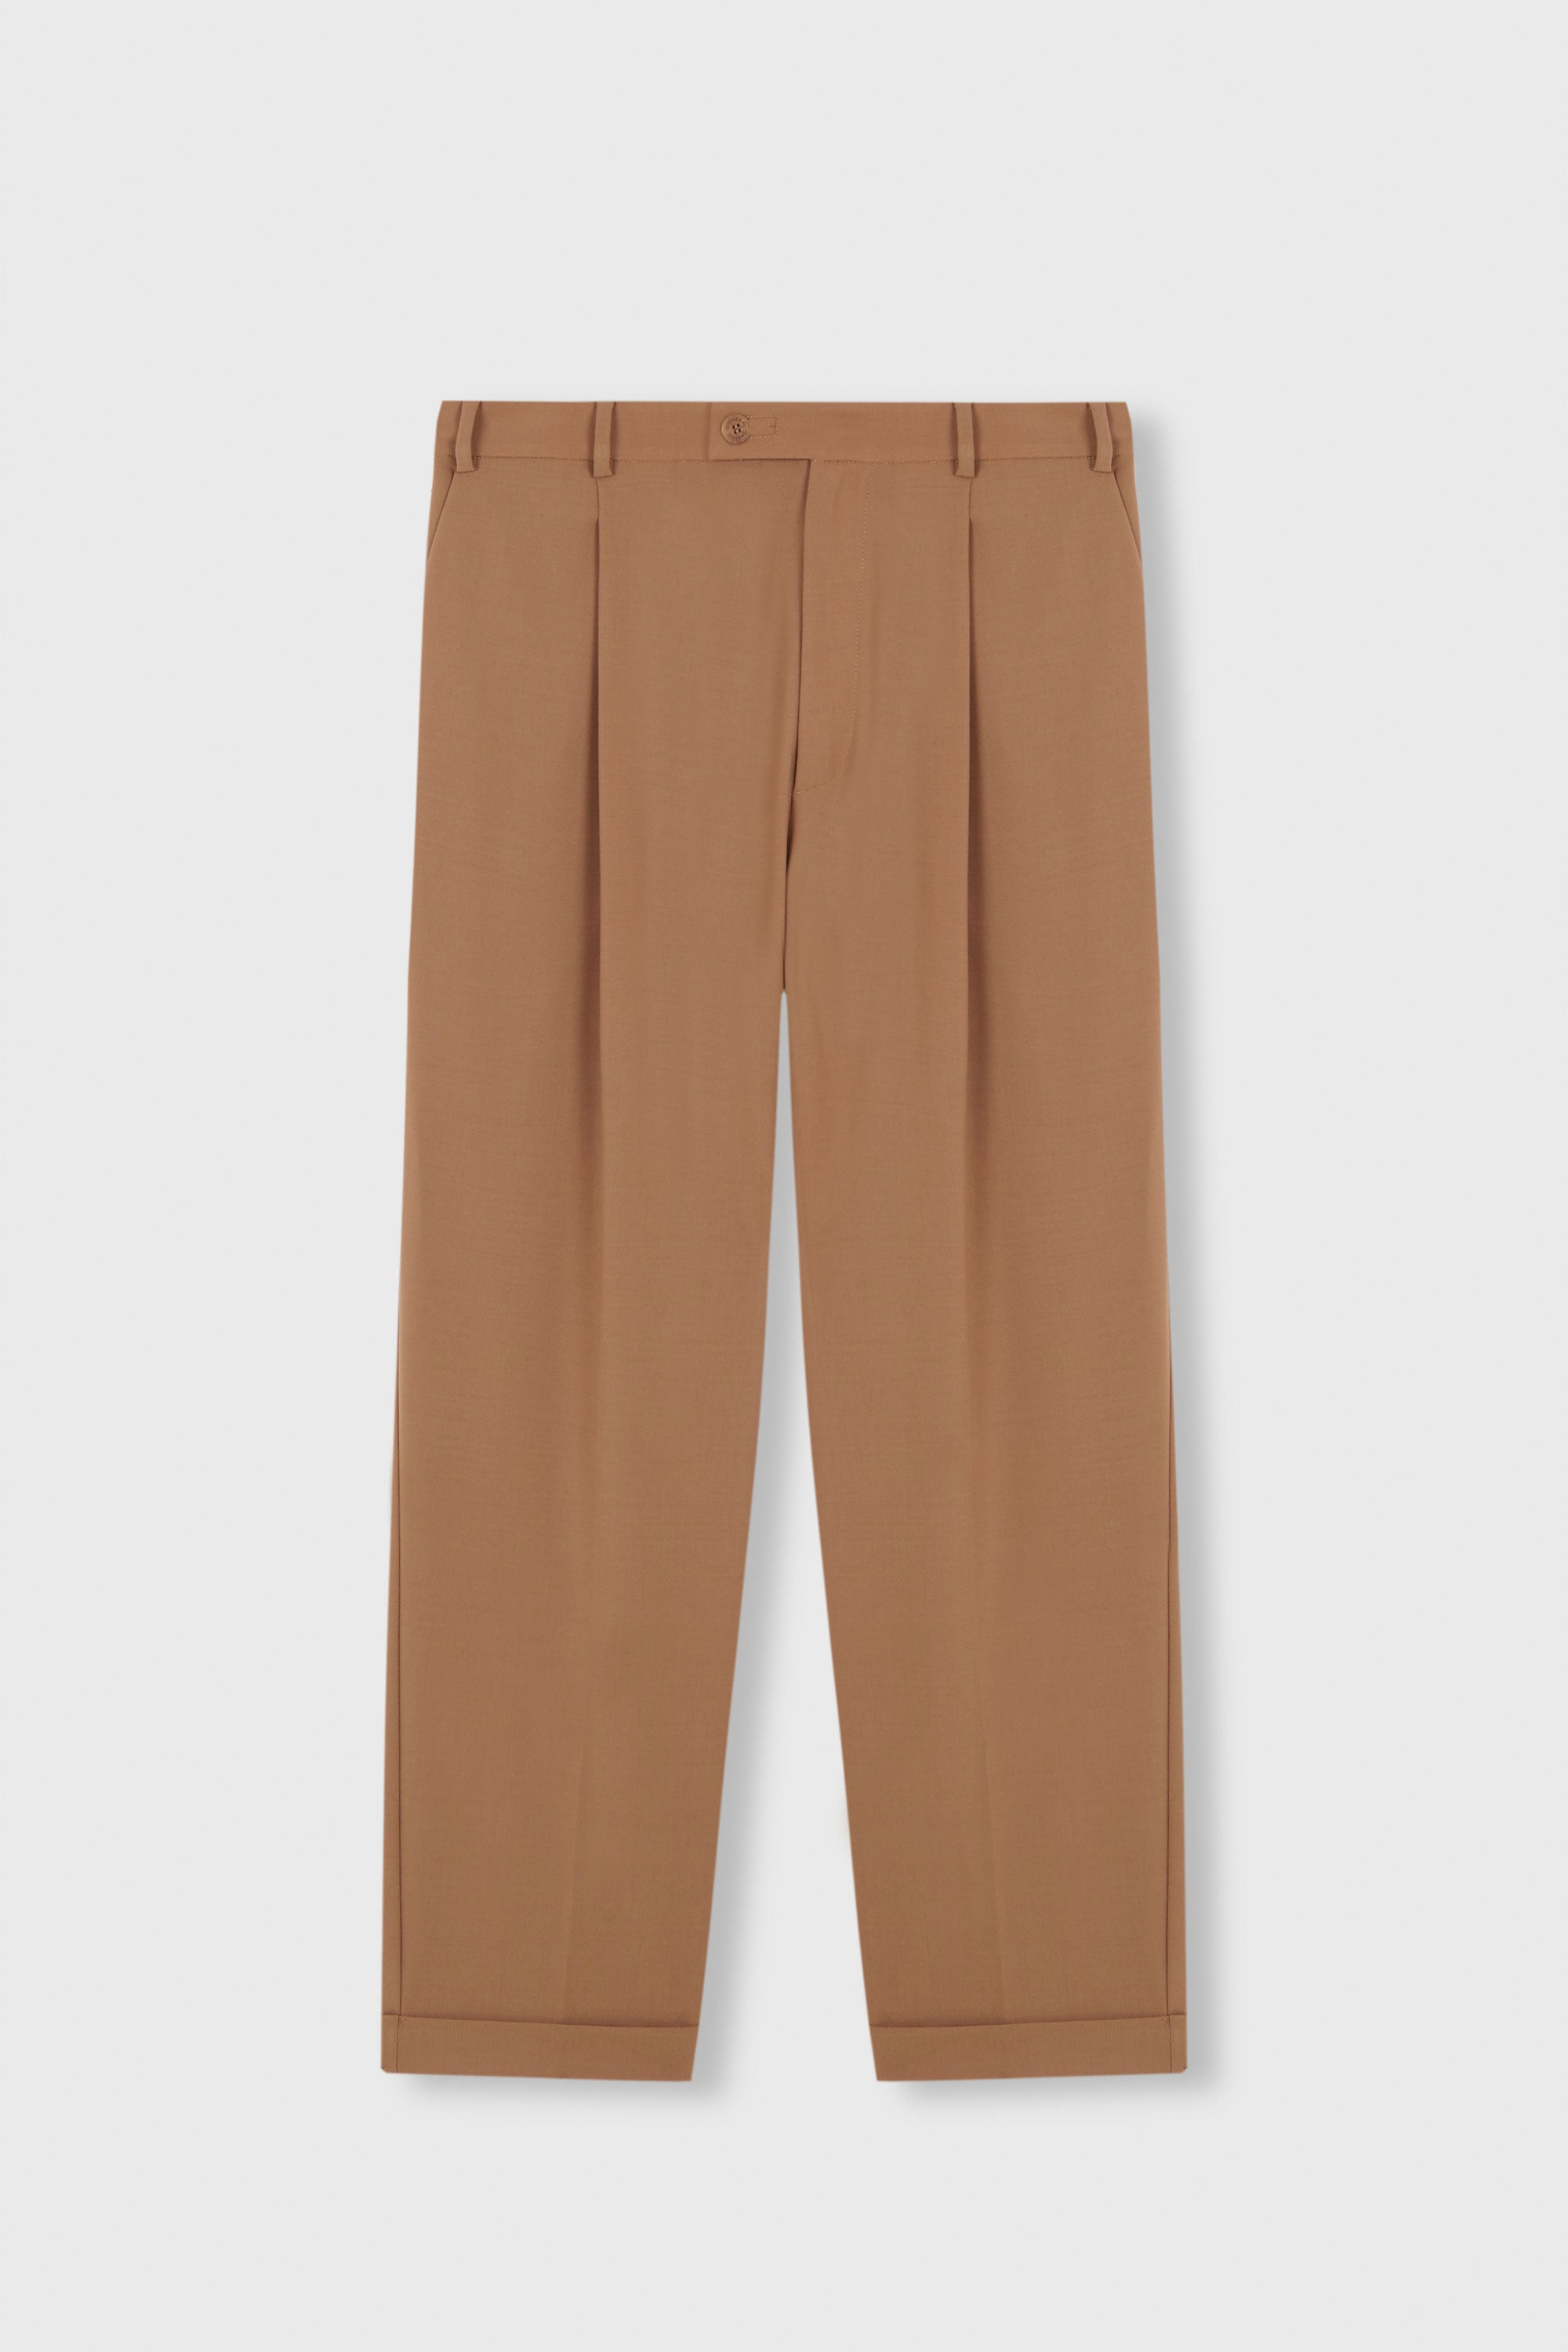 Coated Camel Color Skinny Pants For Women - Outdoor Trousers | Lovez Aqua